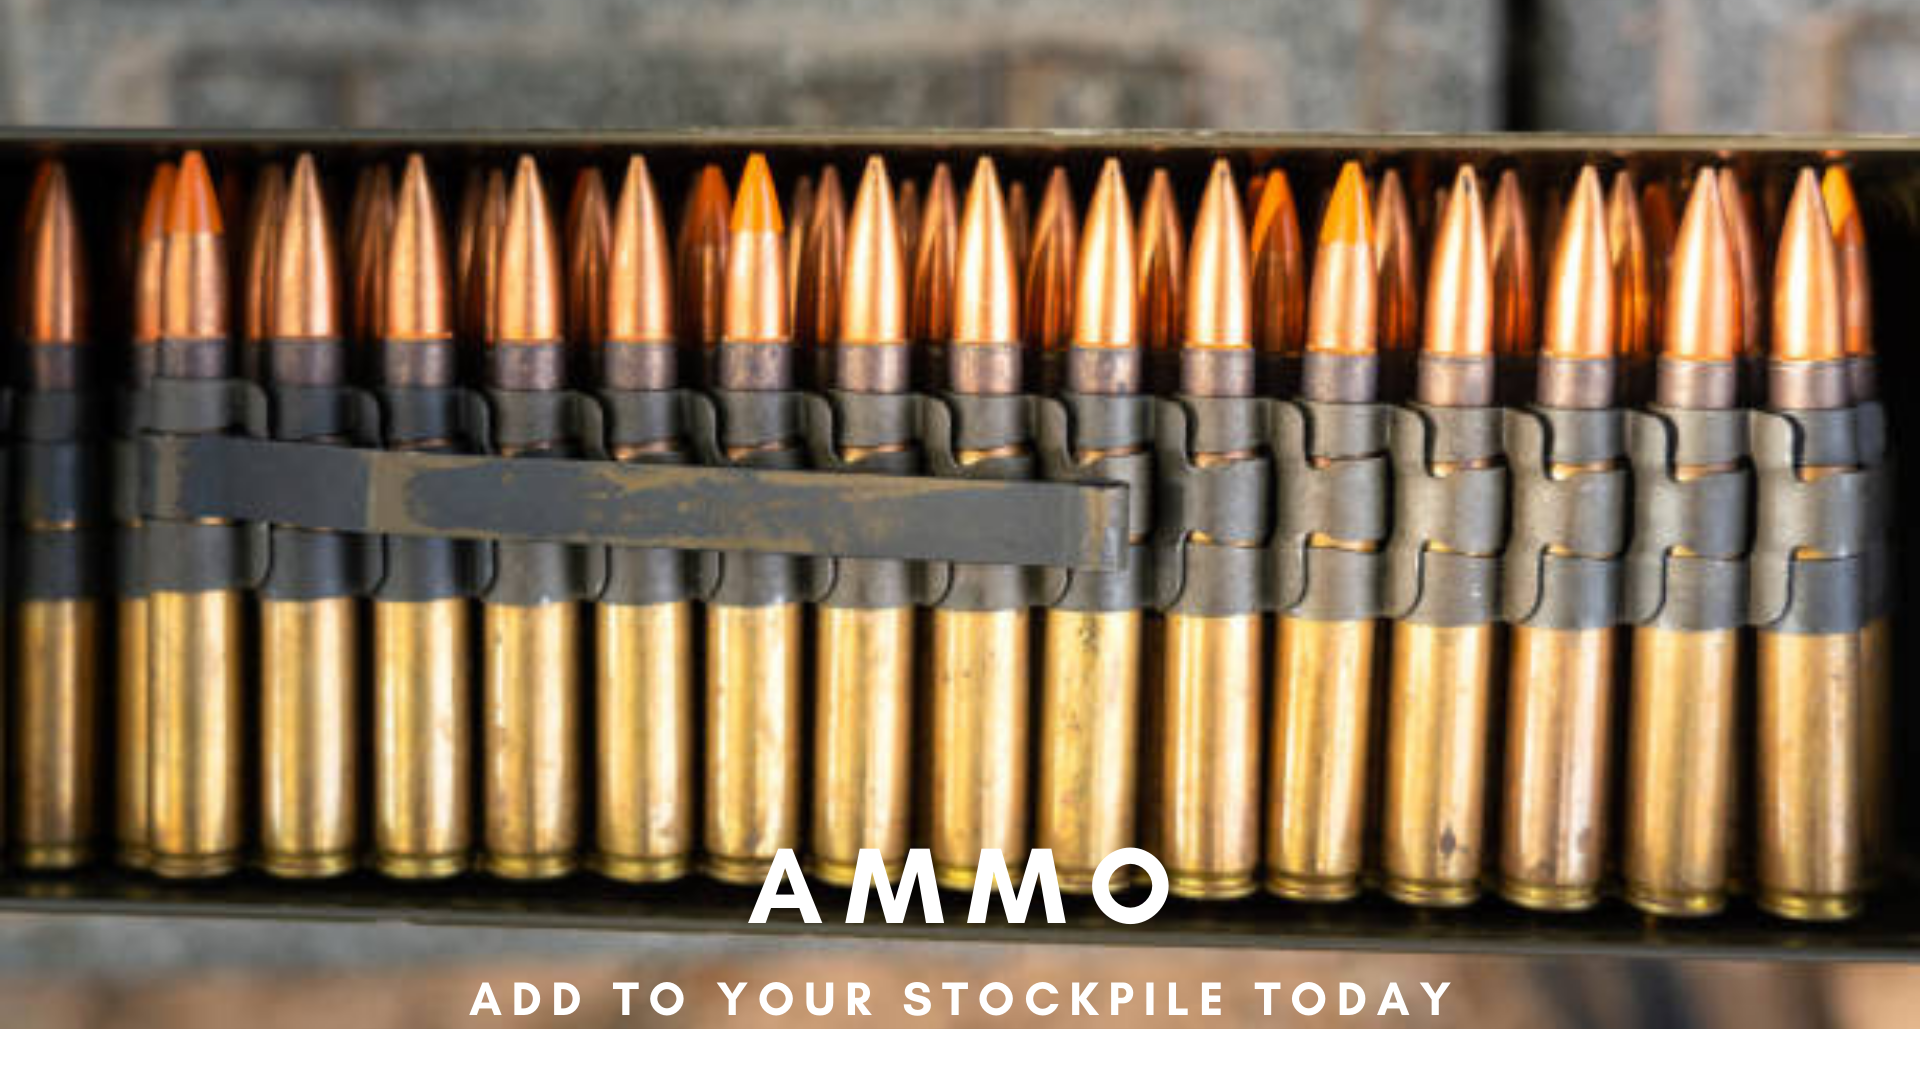 https://www.onlineoutfitters.com/catalog/ammo